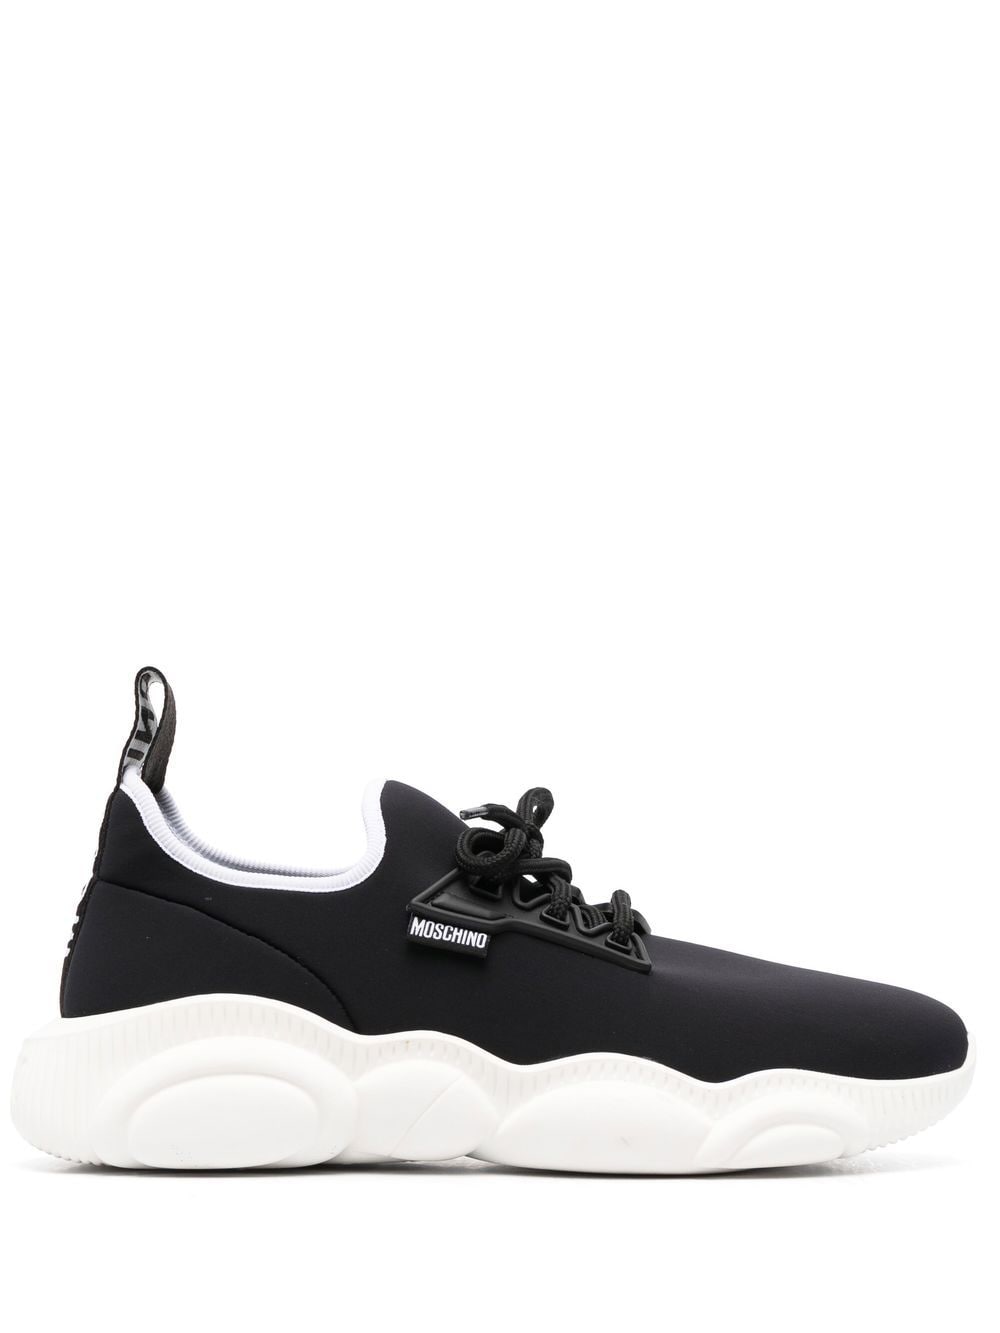 Moschino Almond-toe Running Sneakers In Black